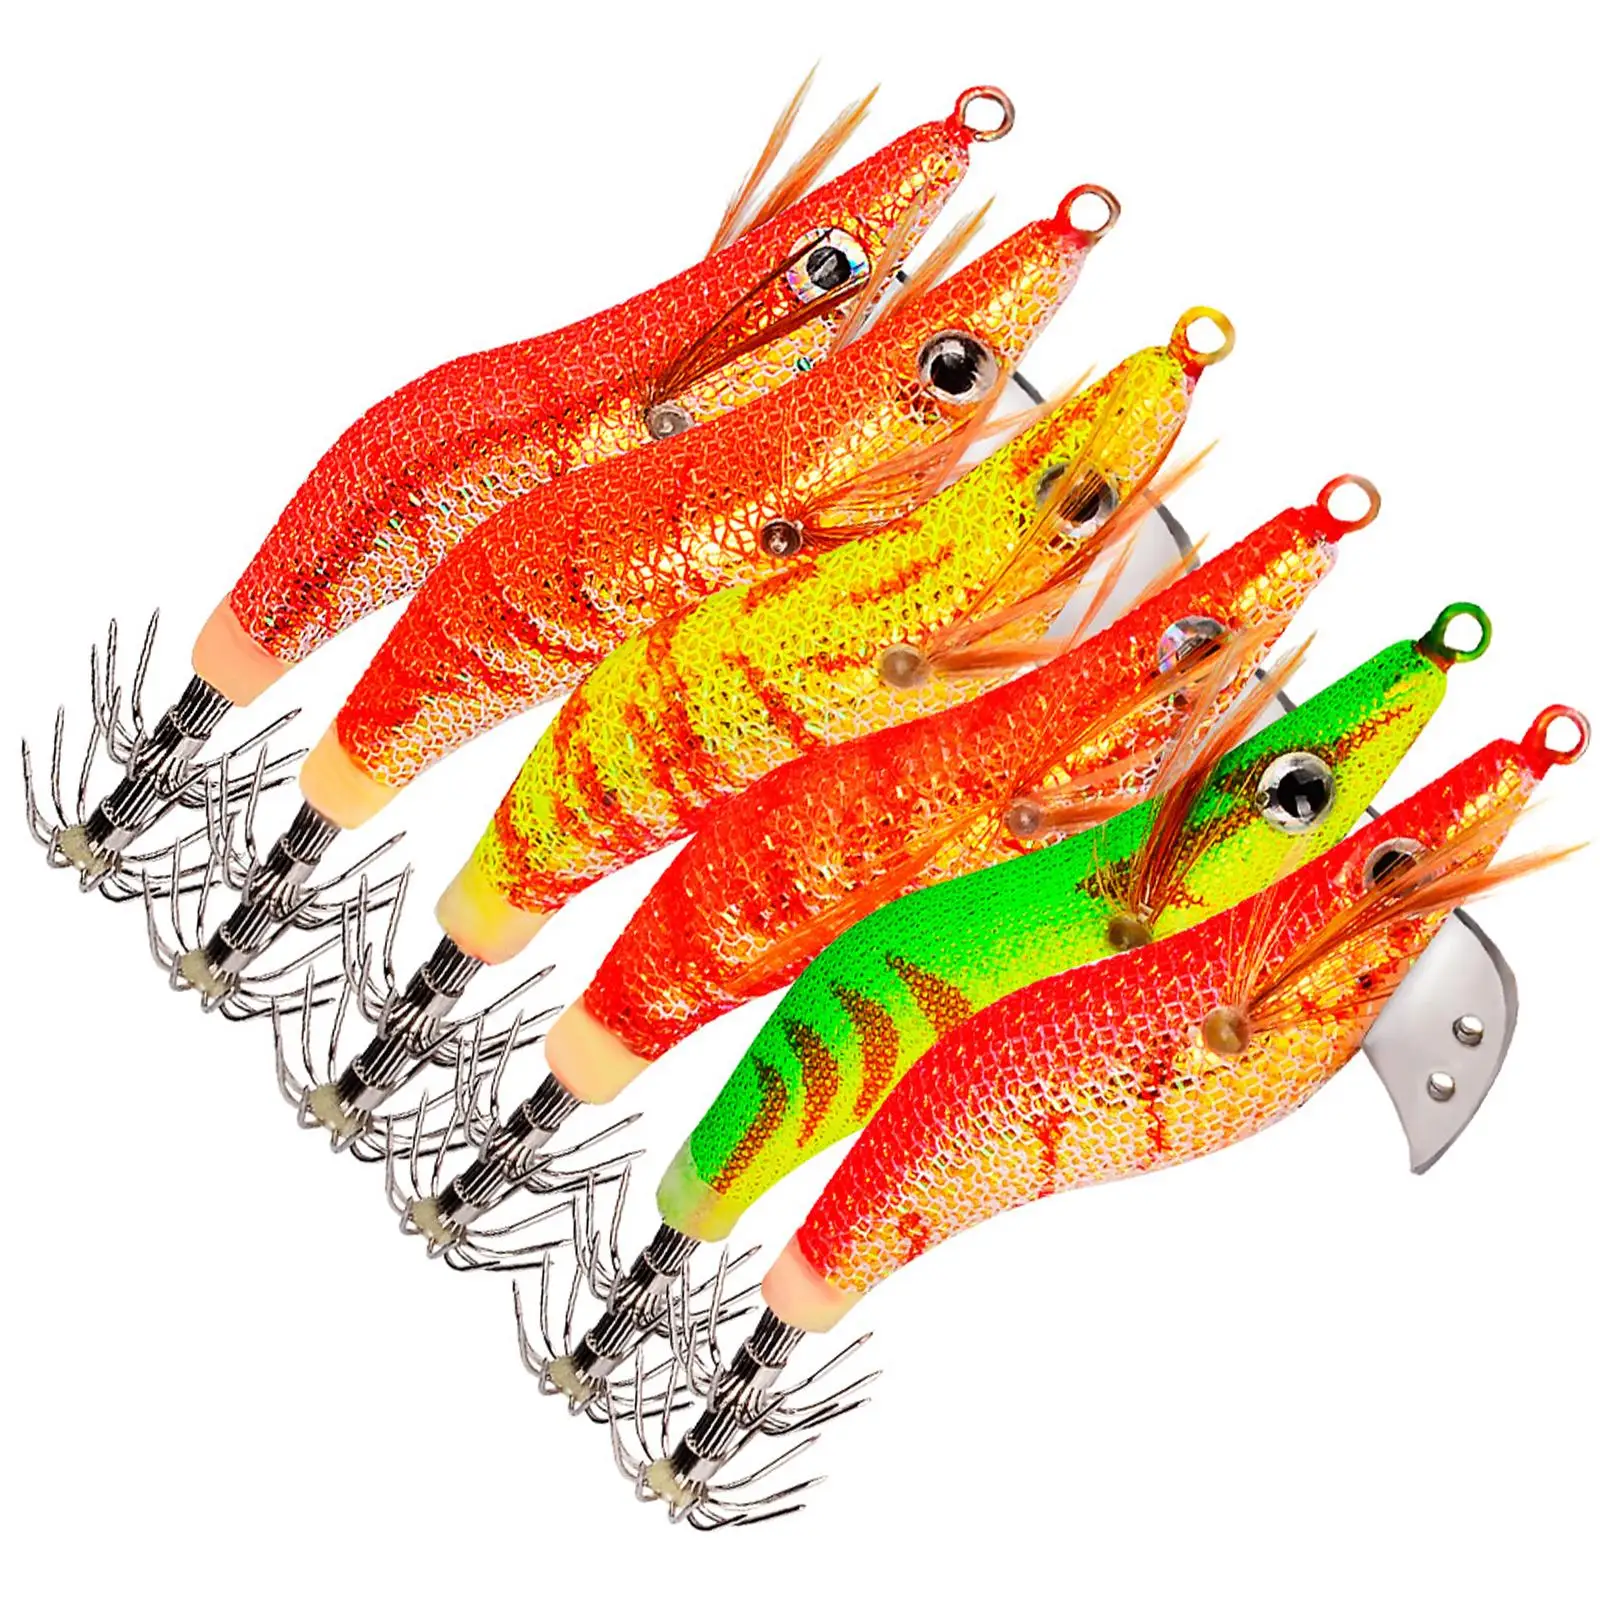 6x Squid Jig Hook Hard Fishing Lures 3D Eyes Fishing Gear Artificial Squid Cuttlefish Sleeve Lure Fish Hook for Octopus